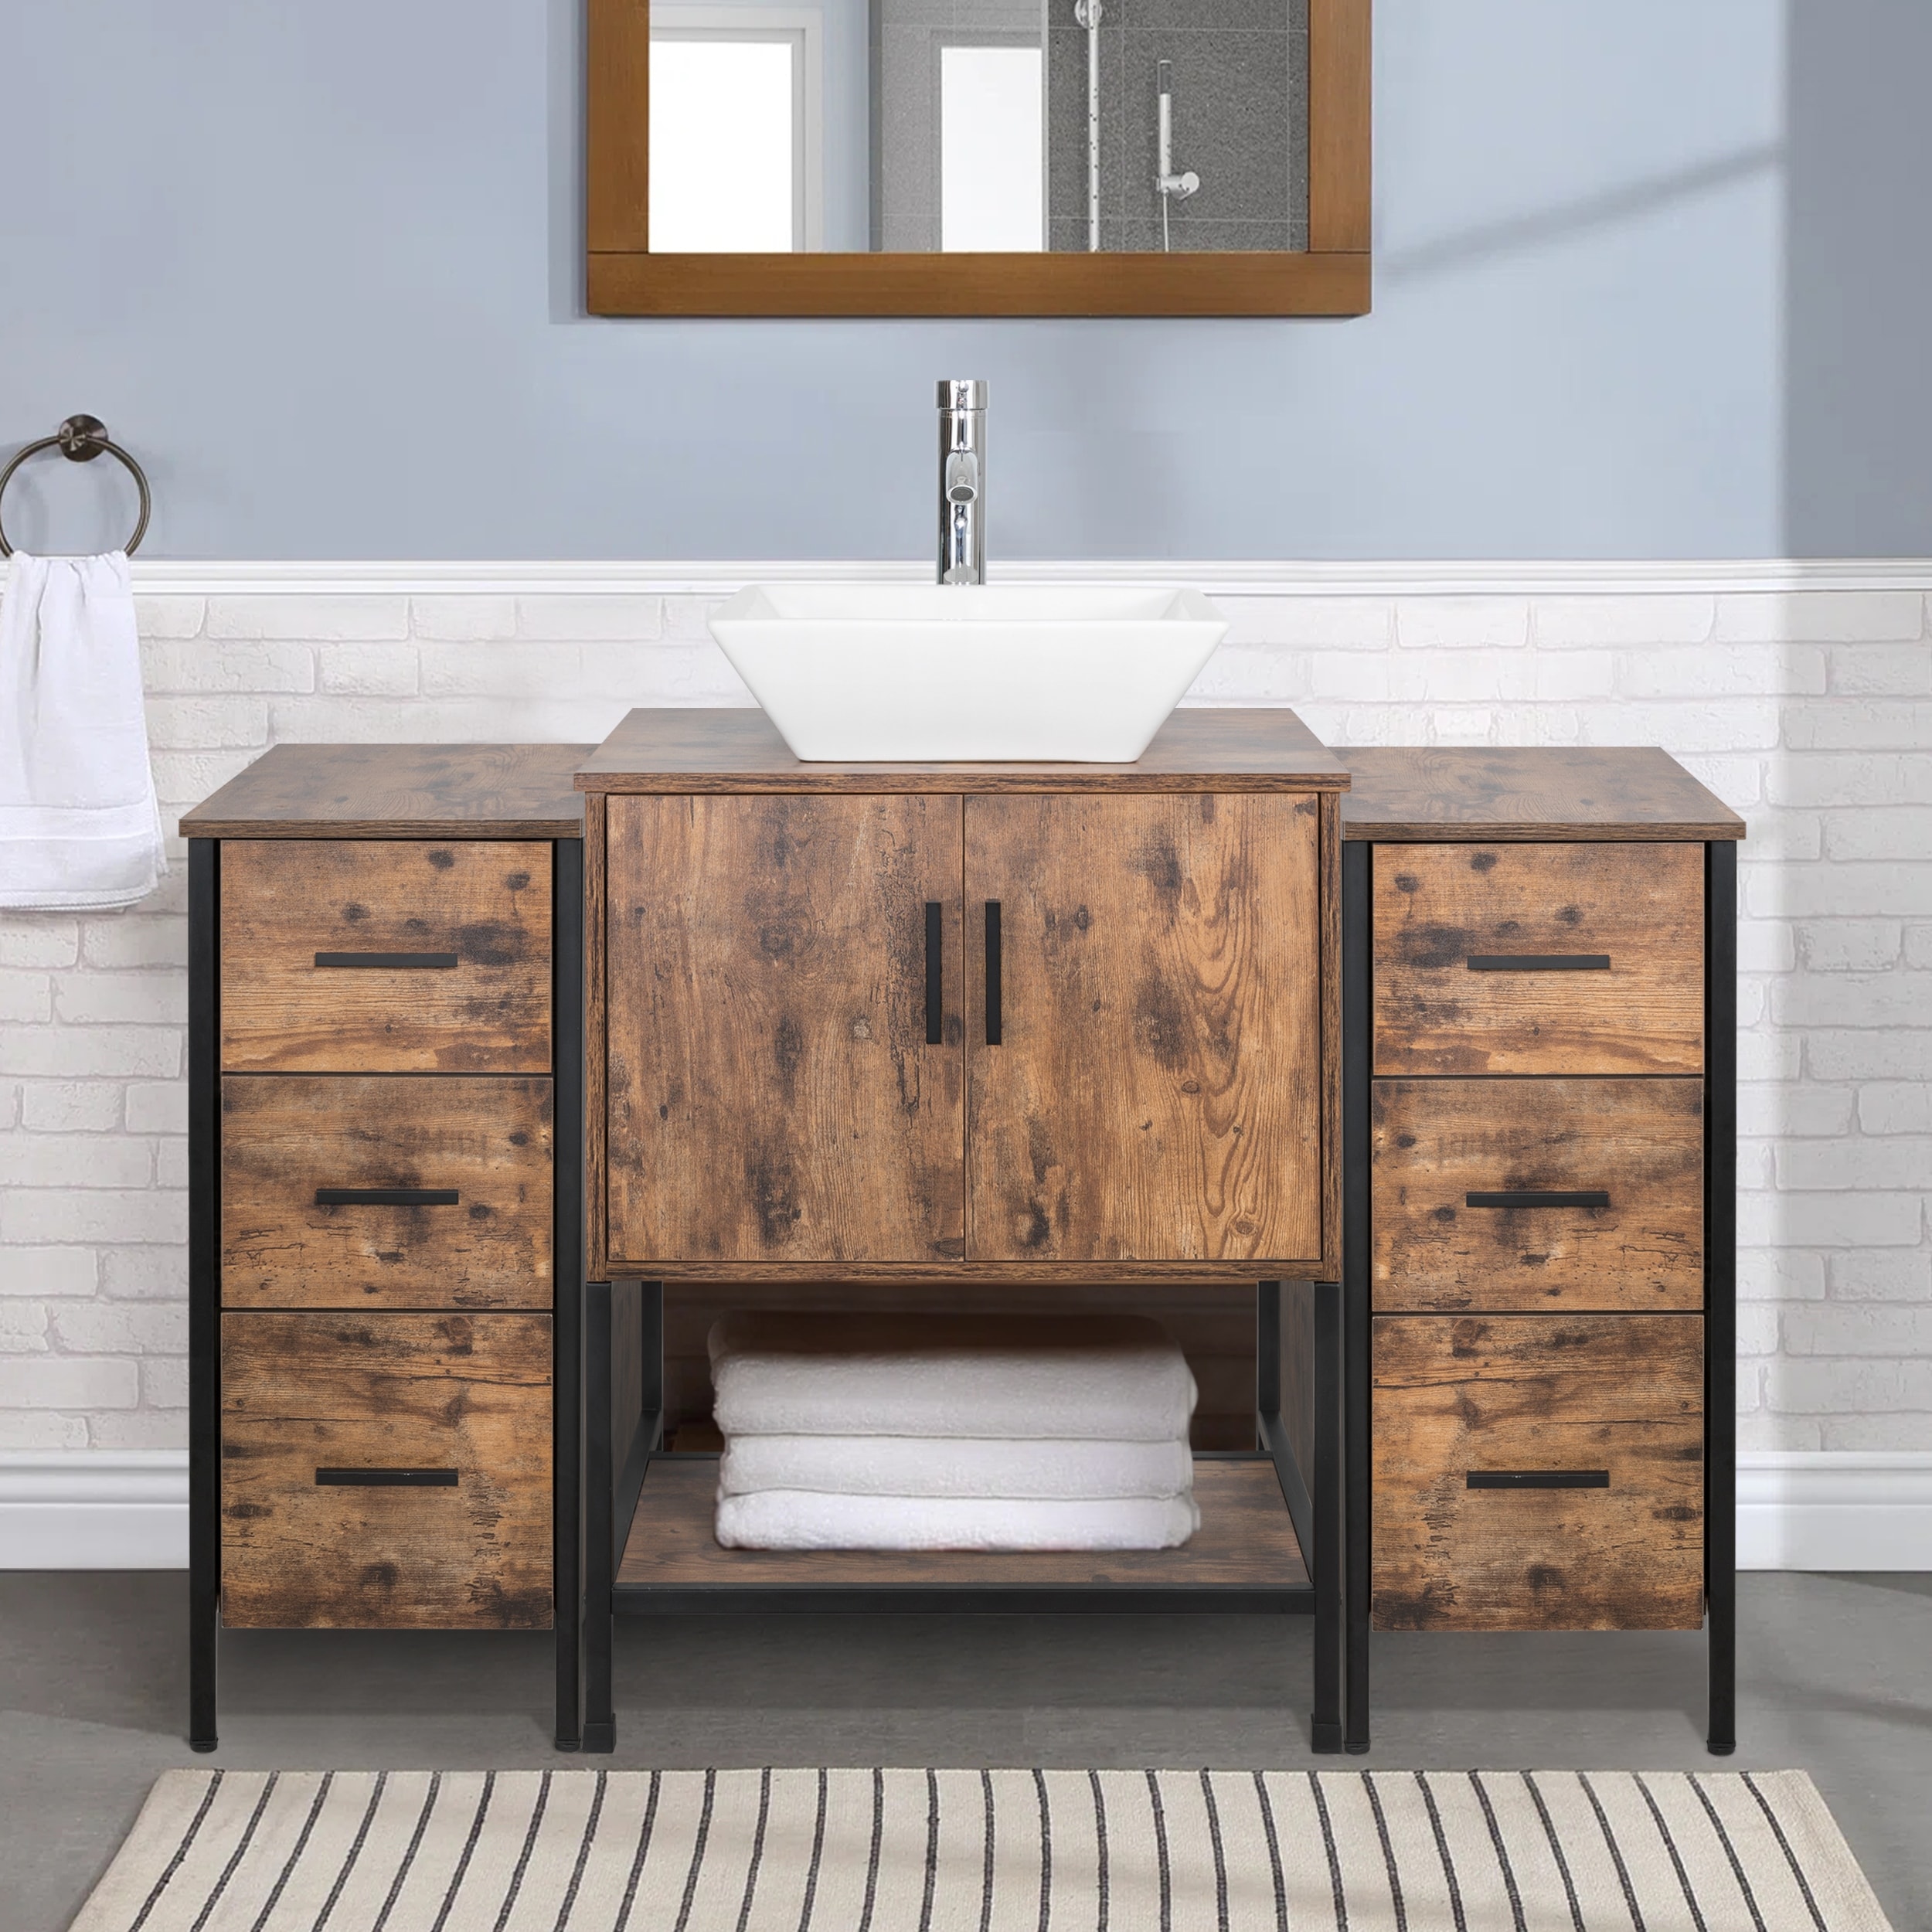 https://ak1.ostkcdn.com/images/products/is/images/direct/b0b235182ae496b3d1fd2f24c22aa63aa56c8e2b/48%22-Bathroom-Vanity-Set-Organizer-Top-Vessel-Sink-W--Faucet-Drain-Cabinet-Combo.jpg